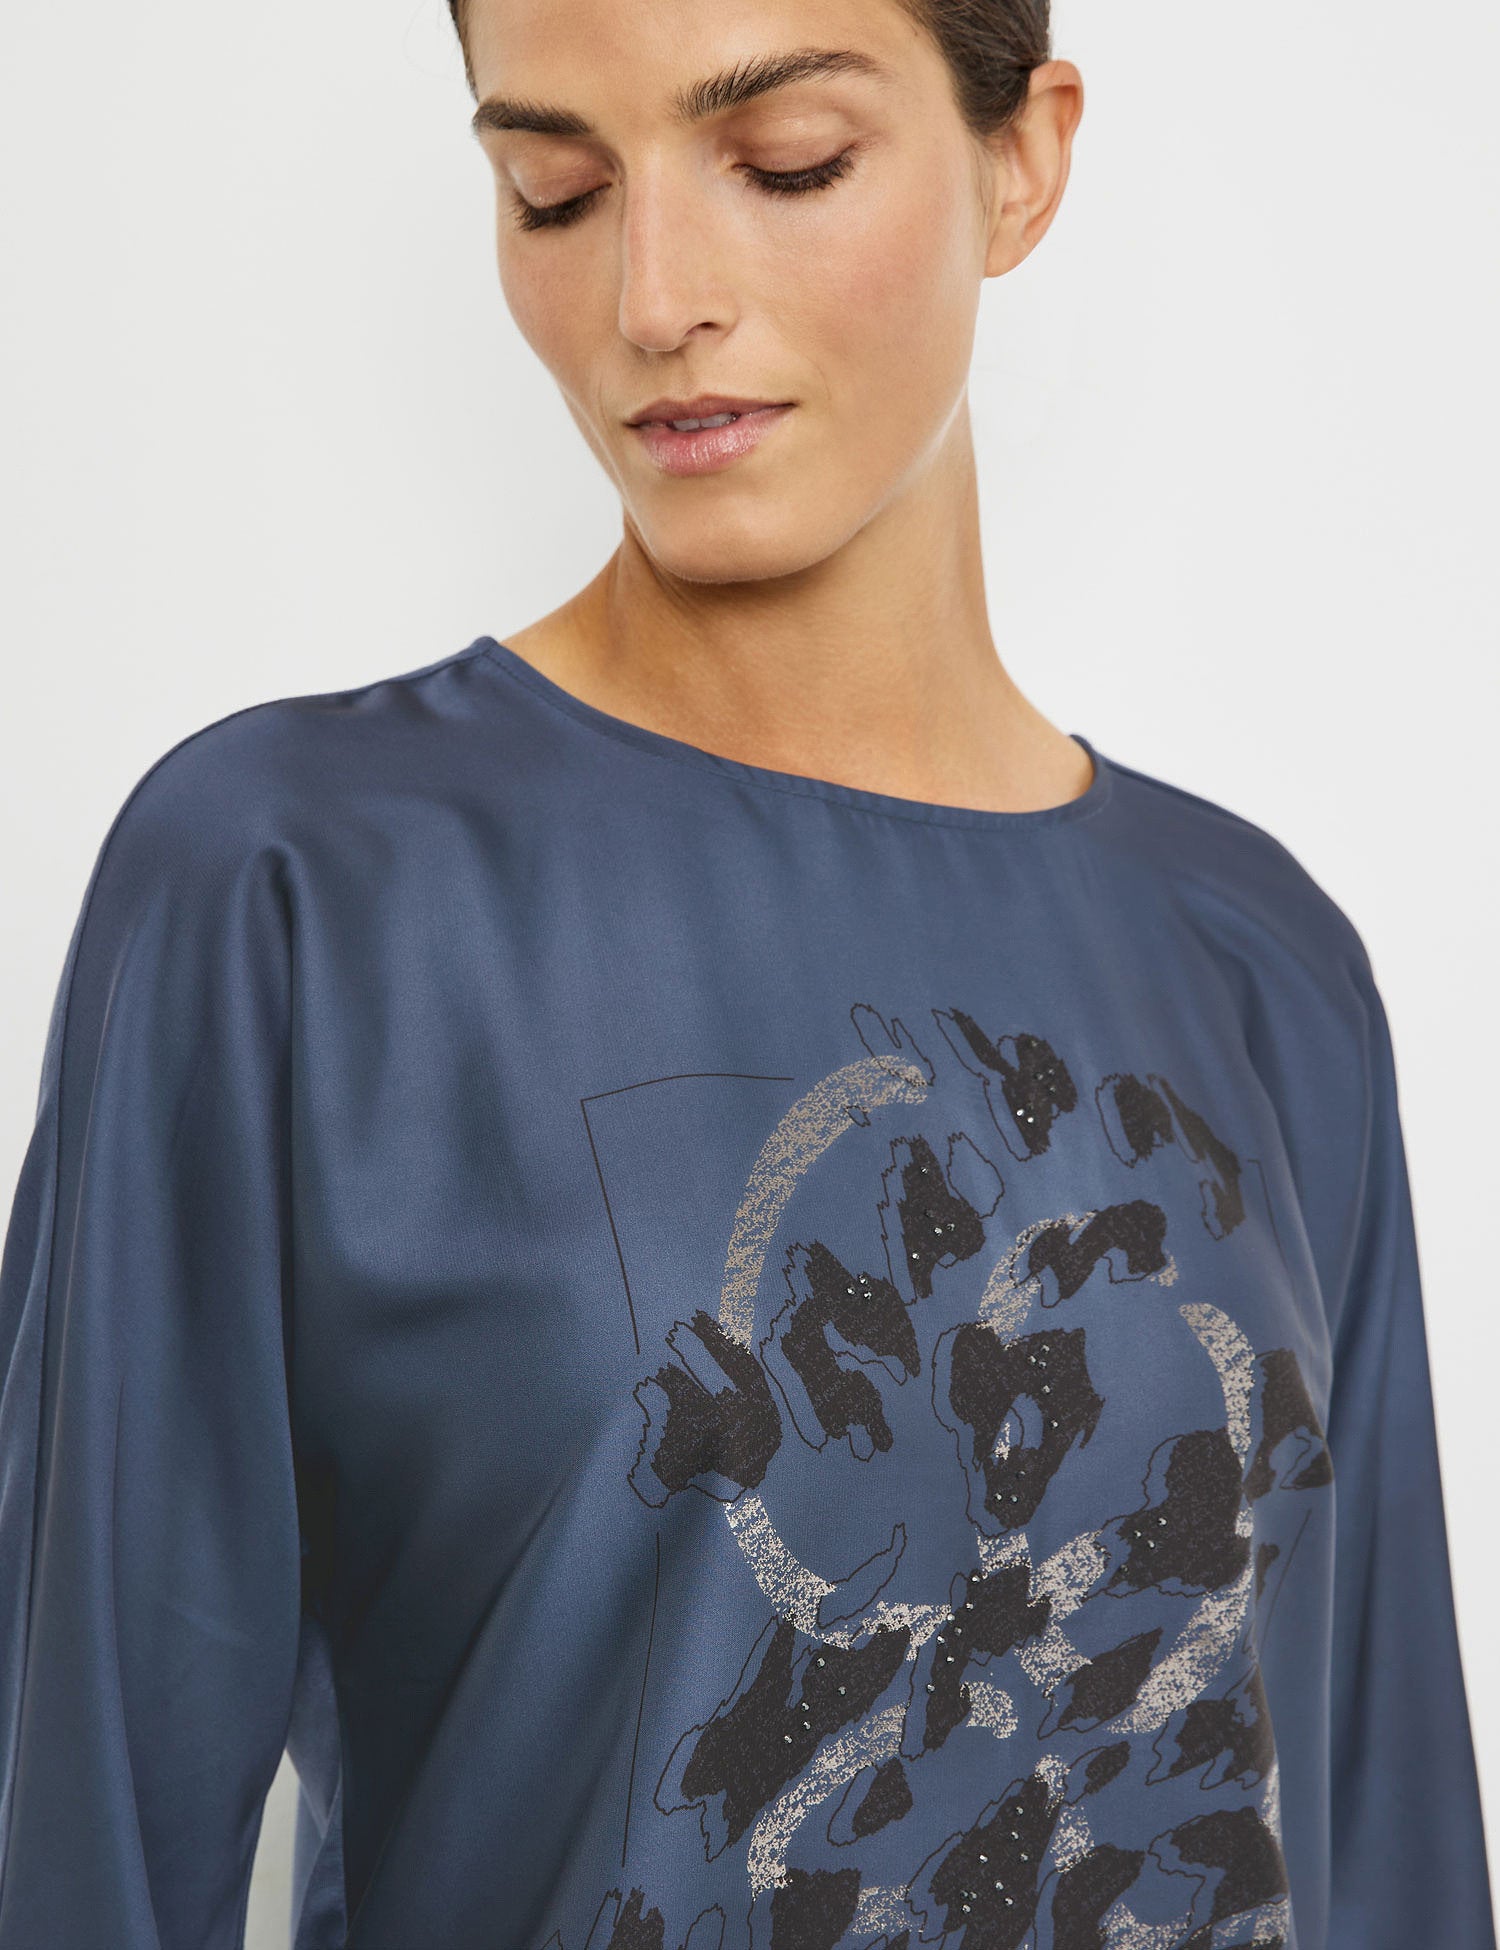 Blouse Top With Fabric Panelling And A Front Print_170095-44002_80929_04